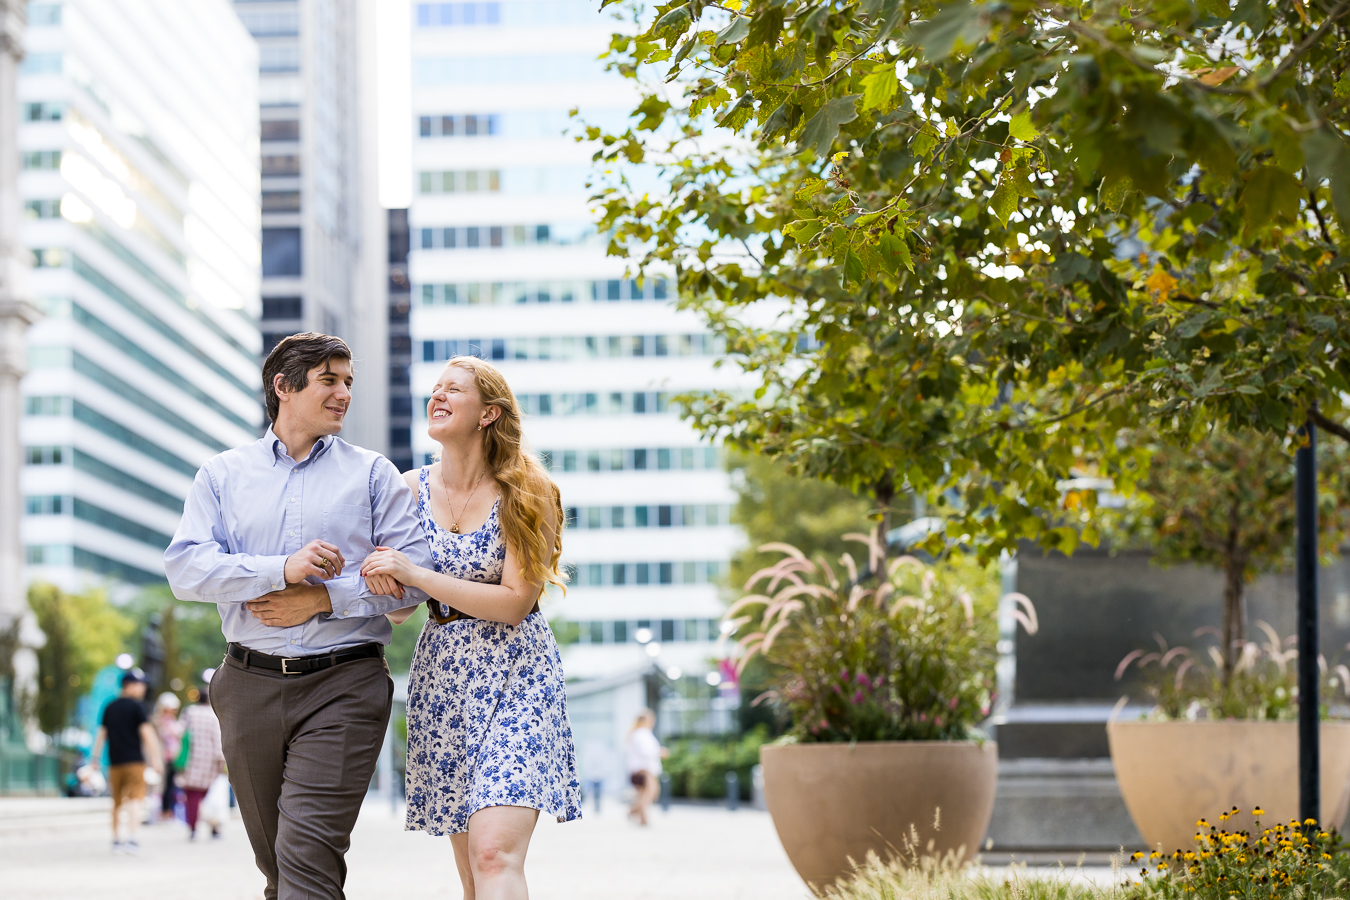 philly engagement photographer, rhinehart photography, captures this light, bright traditional image of the couple as they walk down the busy street arm in arm laughing at one another during their engagement session 